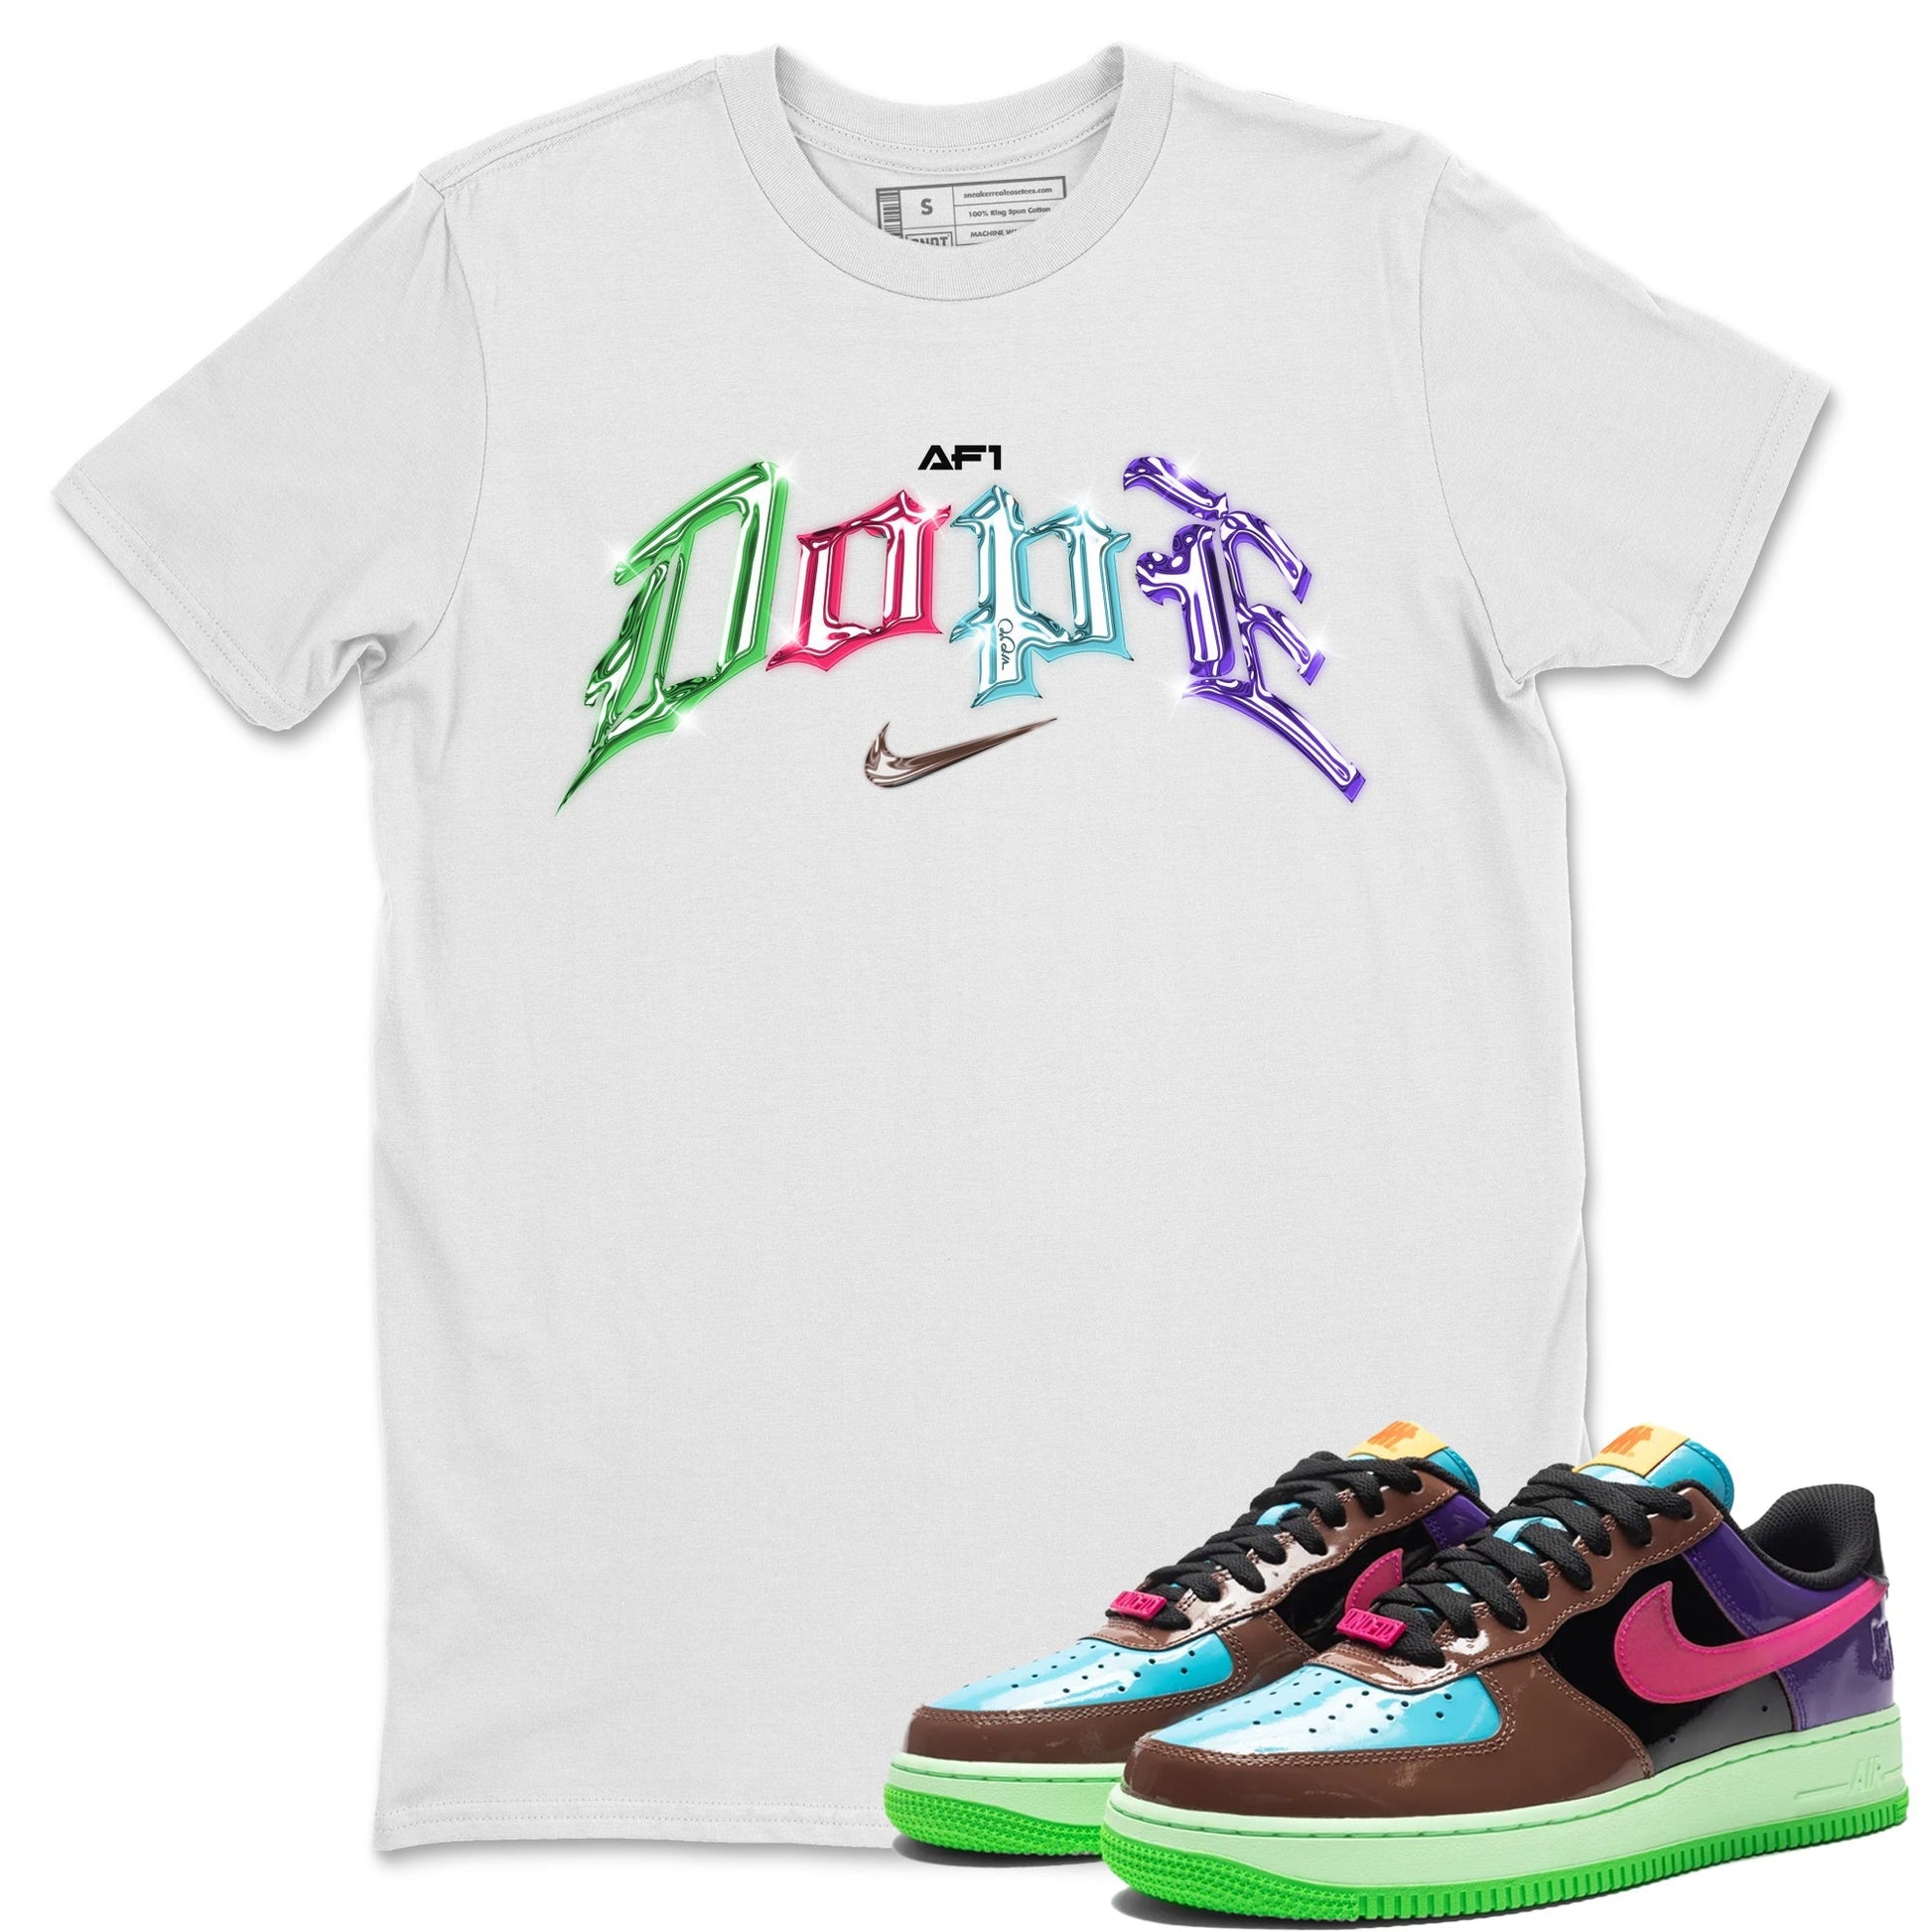 Nike Air Force 1 Low With Velcro Patches Sneaker T-Shirt - Binteez